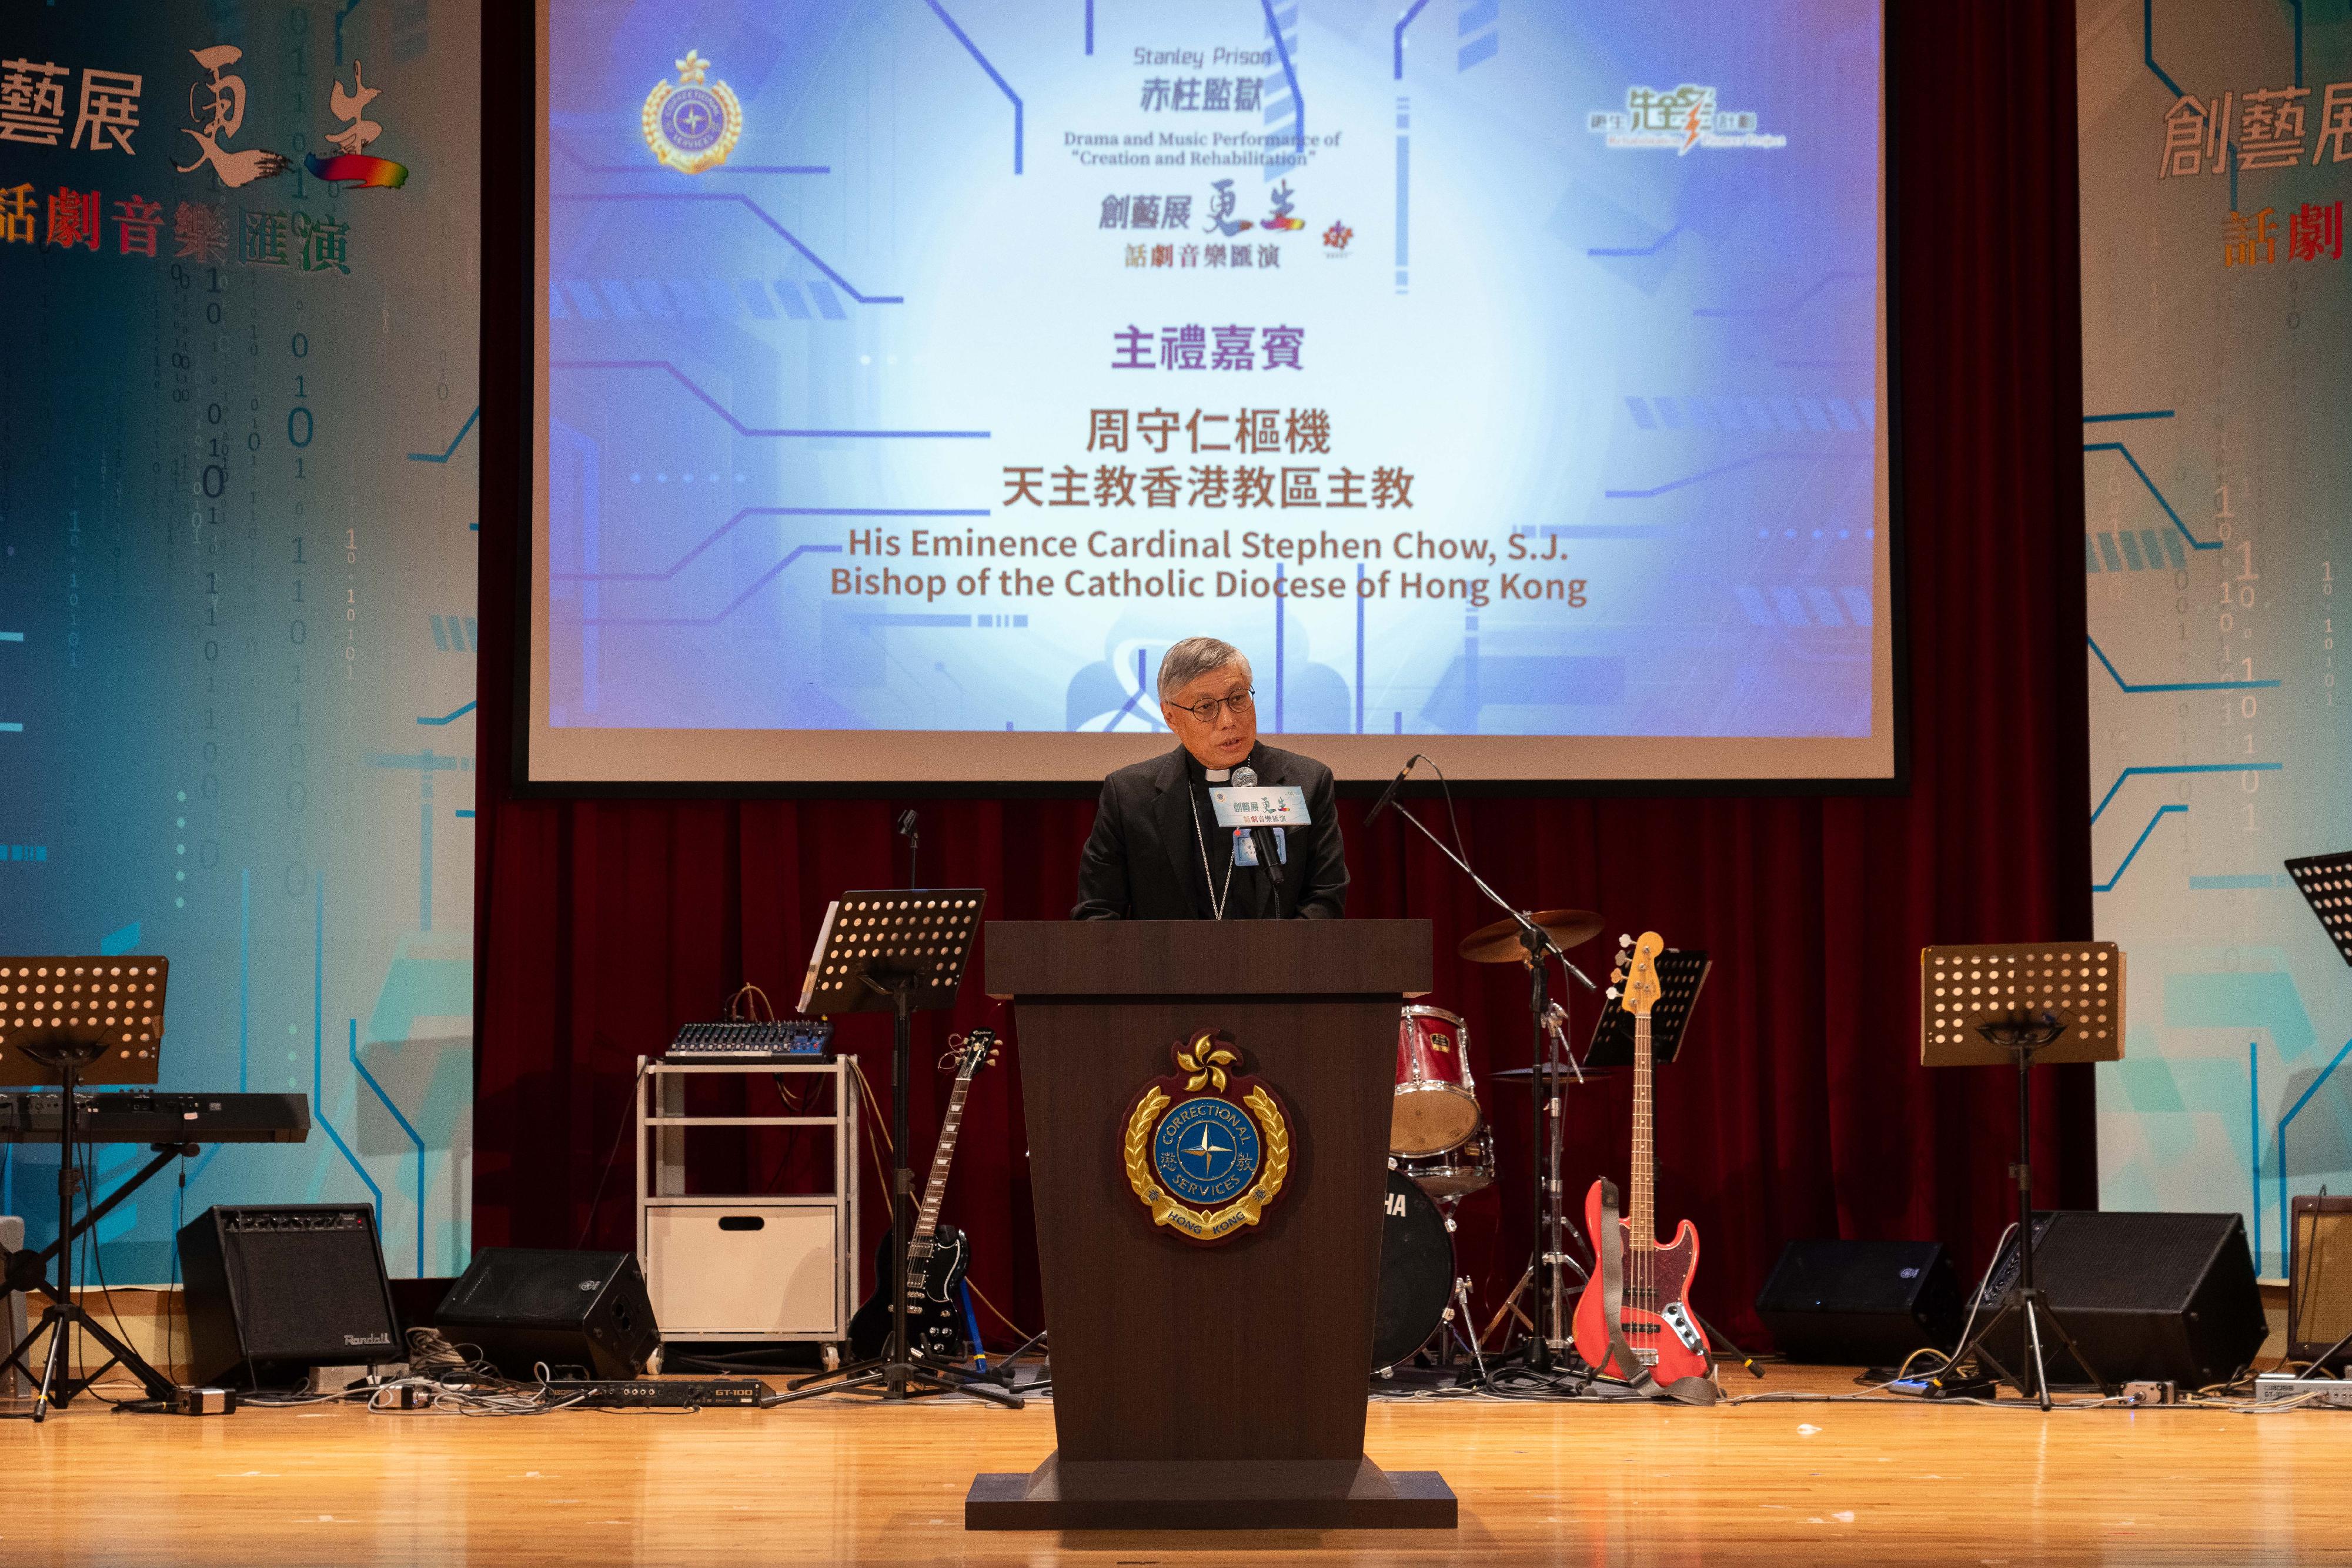 The Correctional Services Department invited teachers and students from secondary schools to attend a "Creation and Rehabilitation" drama and music performance by persons in custody at Stanley Prison today (March 13). Photo shows the Bishop of the Catholic Diocese of Hong Kong, Cardinal Stephen Chow, delivering a speech at the opening ceremony.